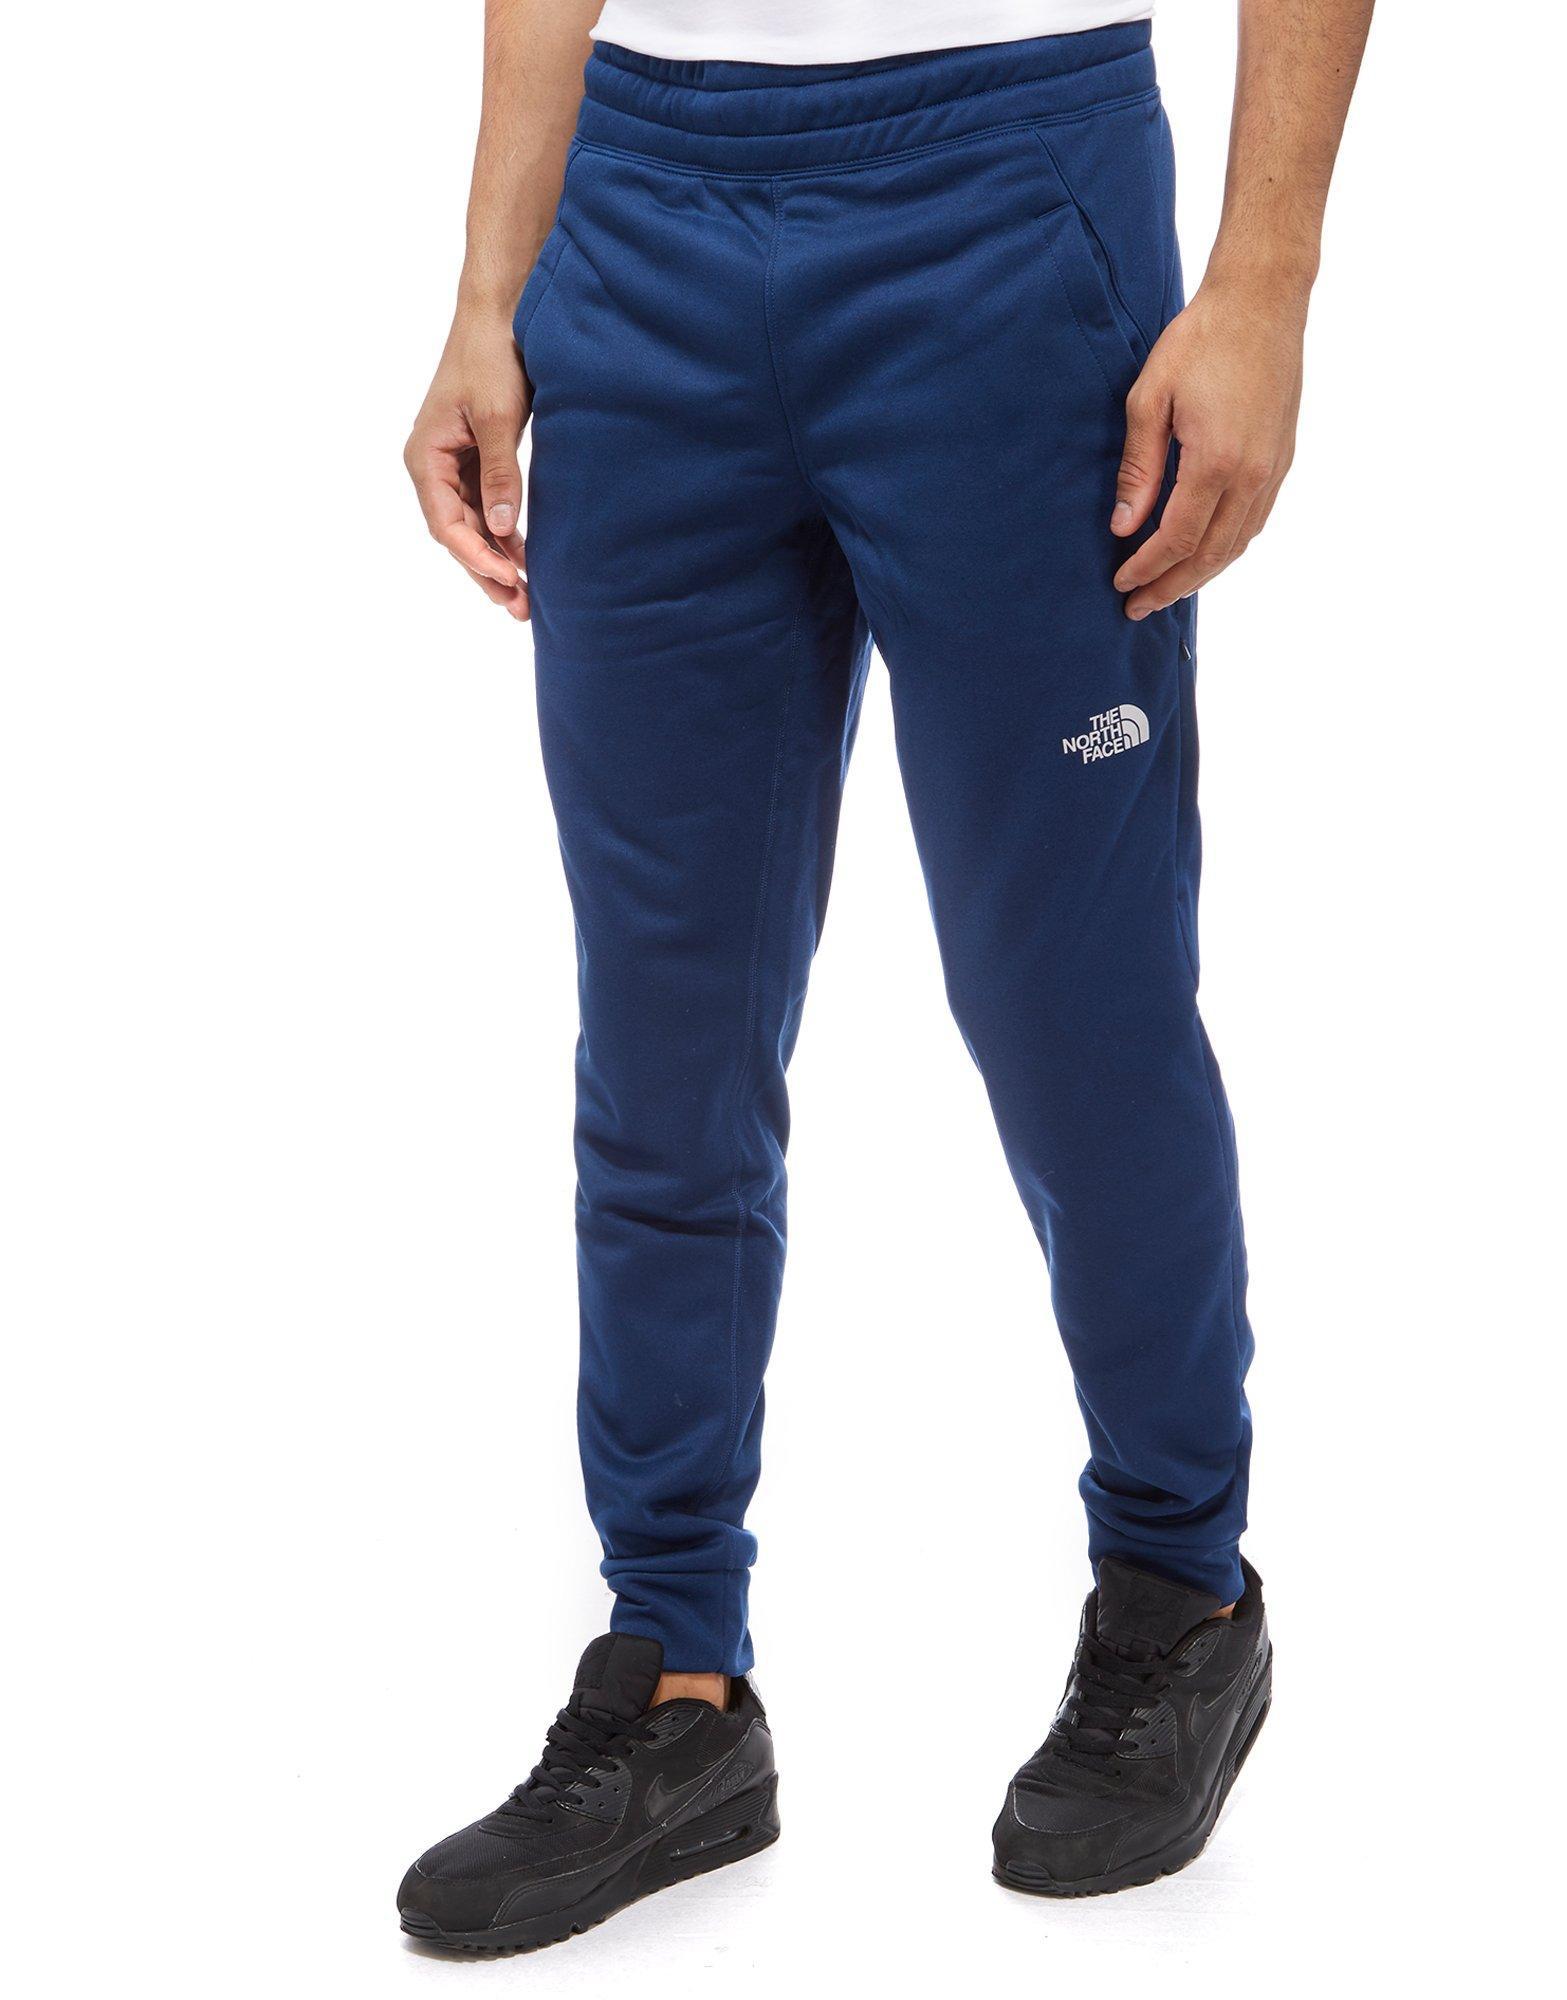 the north face track pants mens